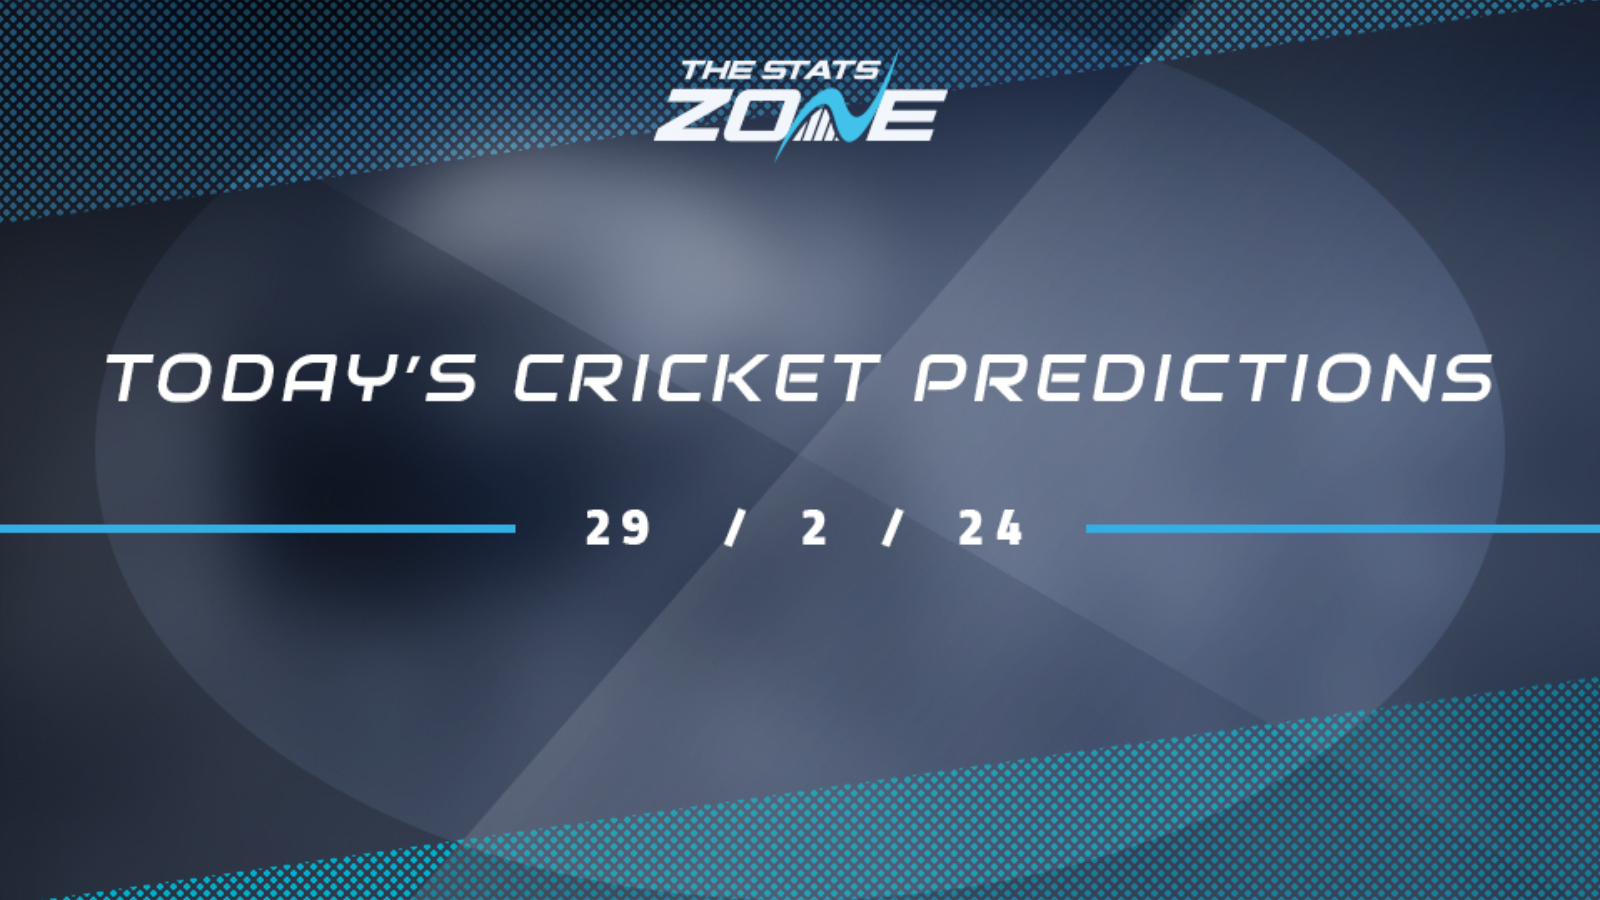 Today's Cricket Predictions (29/02/24) - The Stats Zone